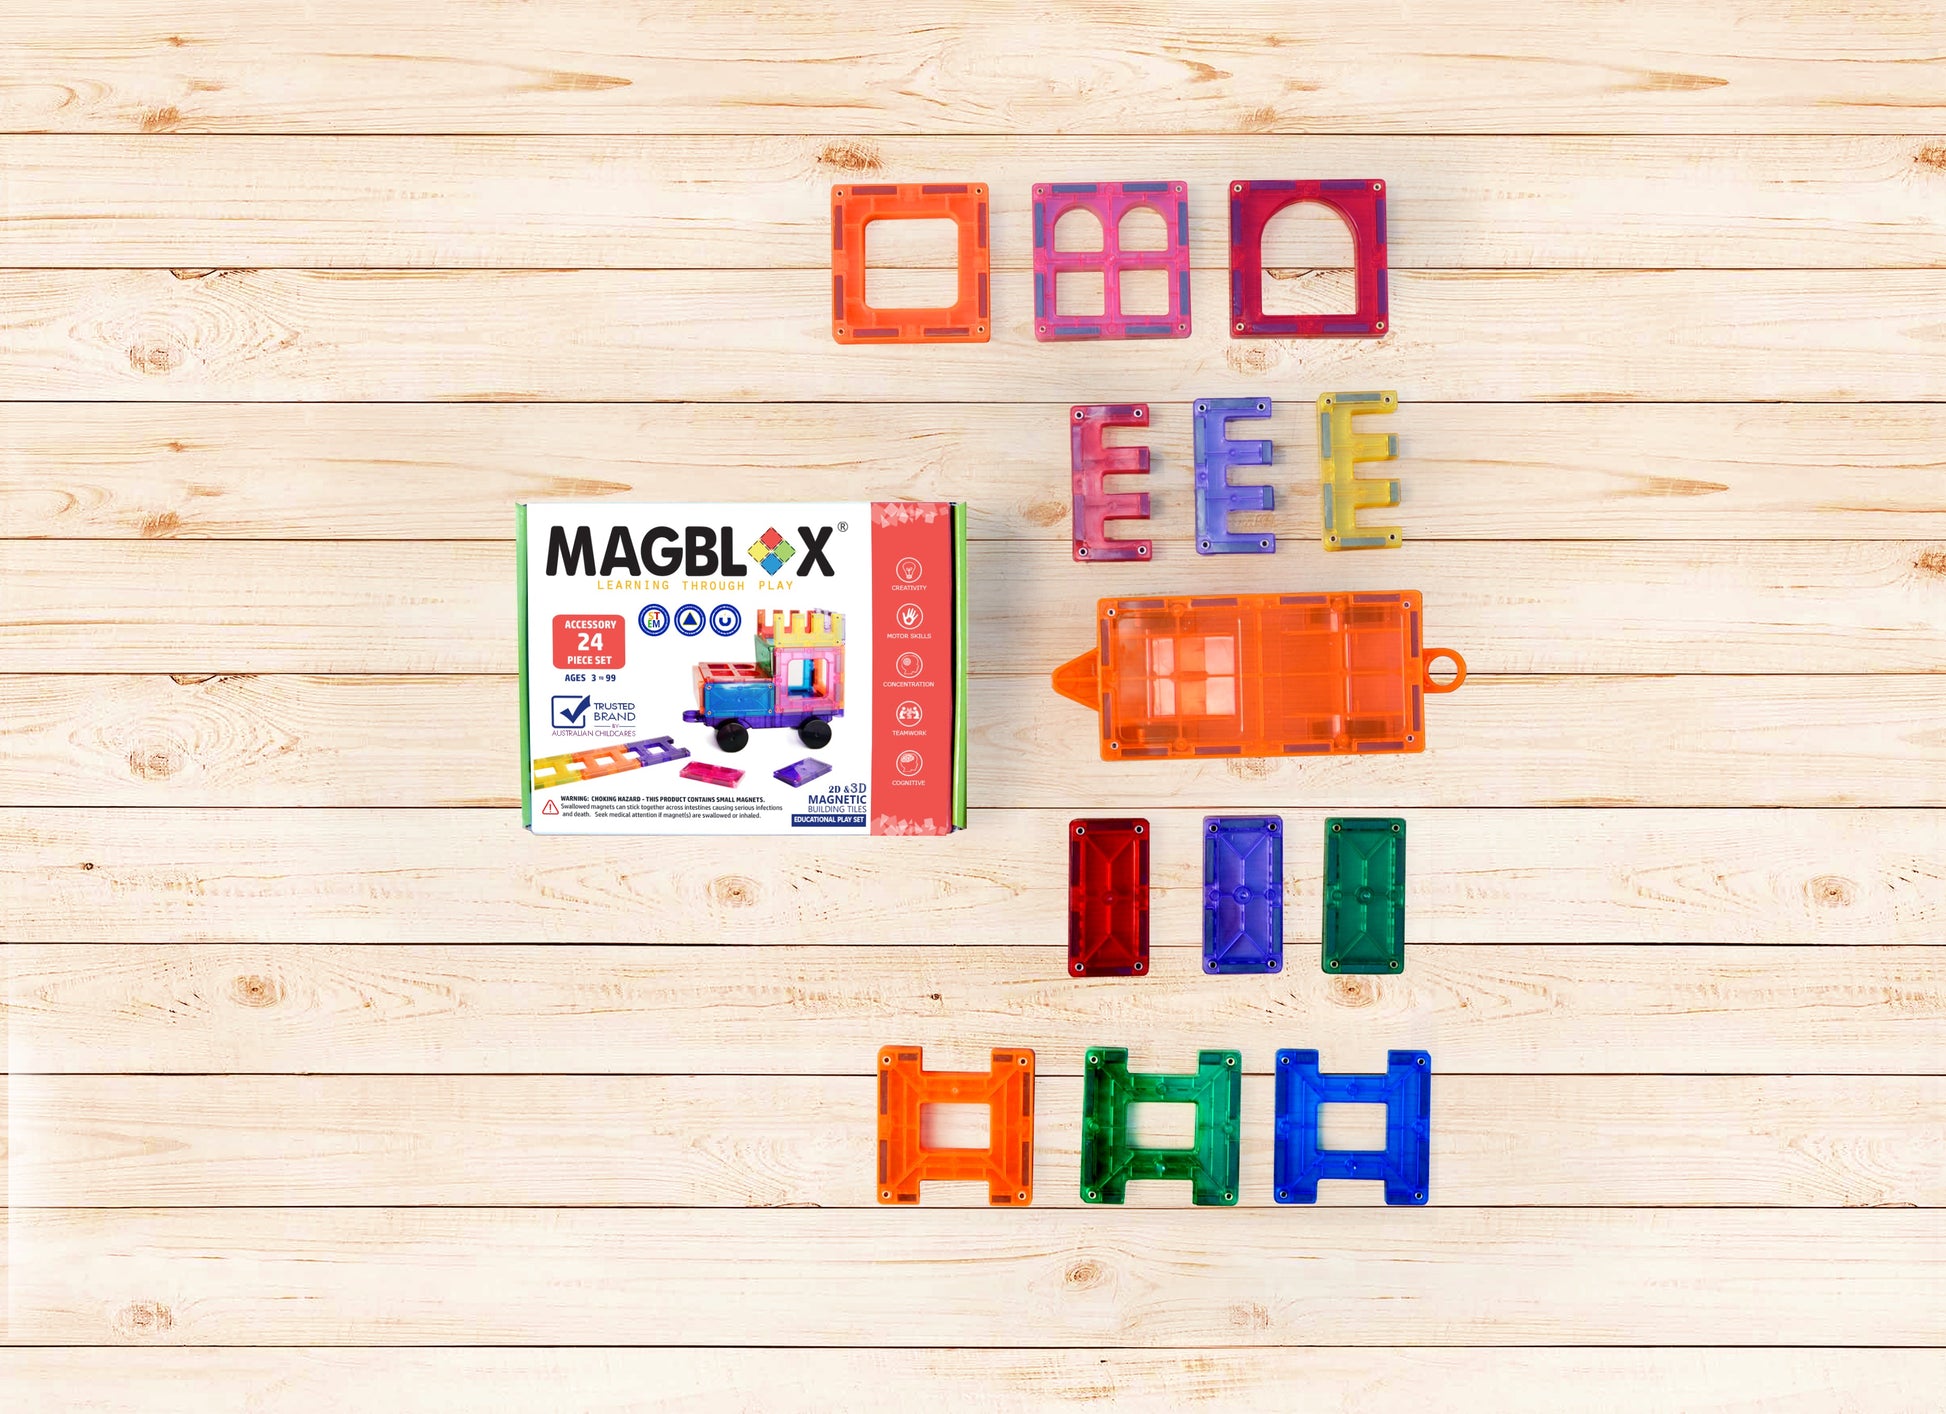 MAGBLOX magnetic building tiles &amp; MAGBRIX magnetic brick tile sets. Compatible with building blocks like LEGO or Duplo. Open-ended STEM education toys for kids &amp; toddlers. Toys for play-based learning.